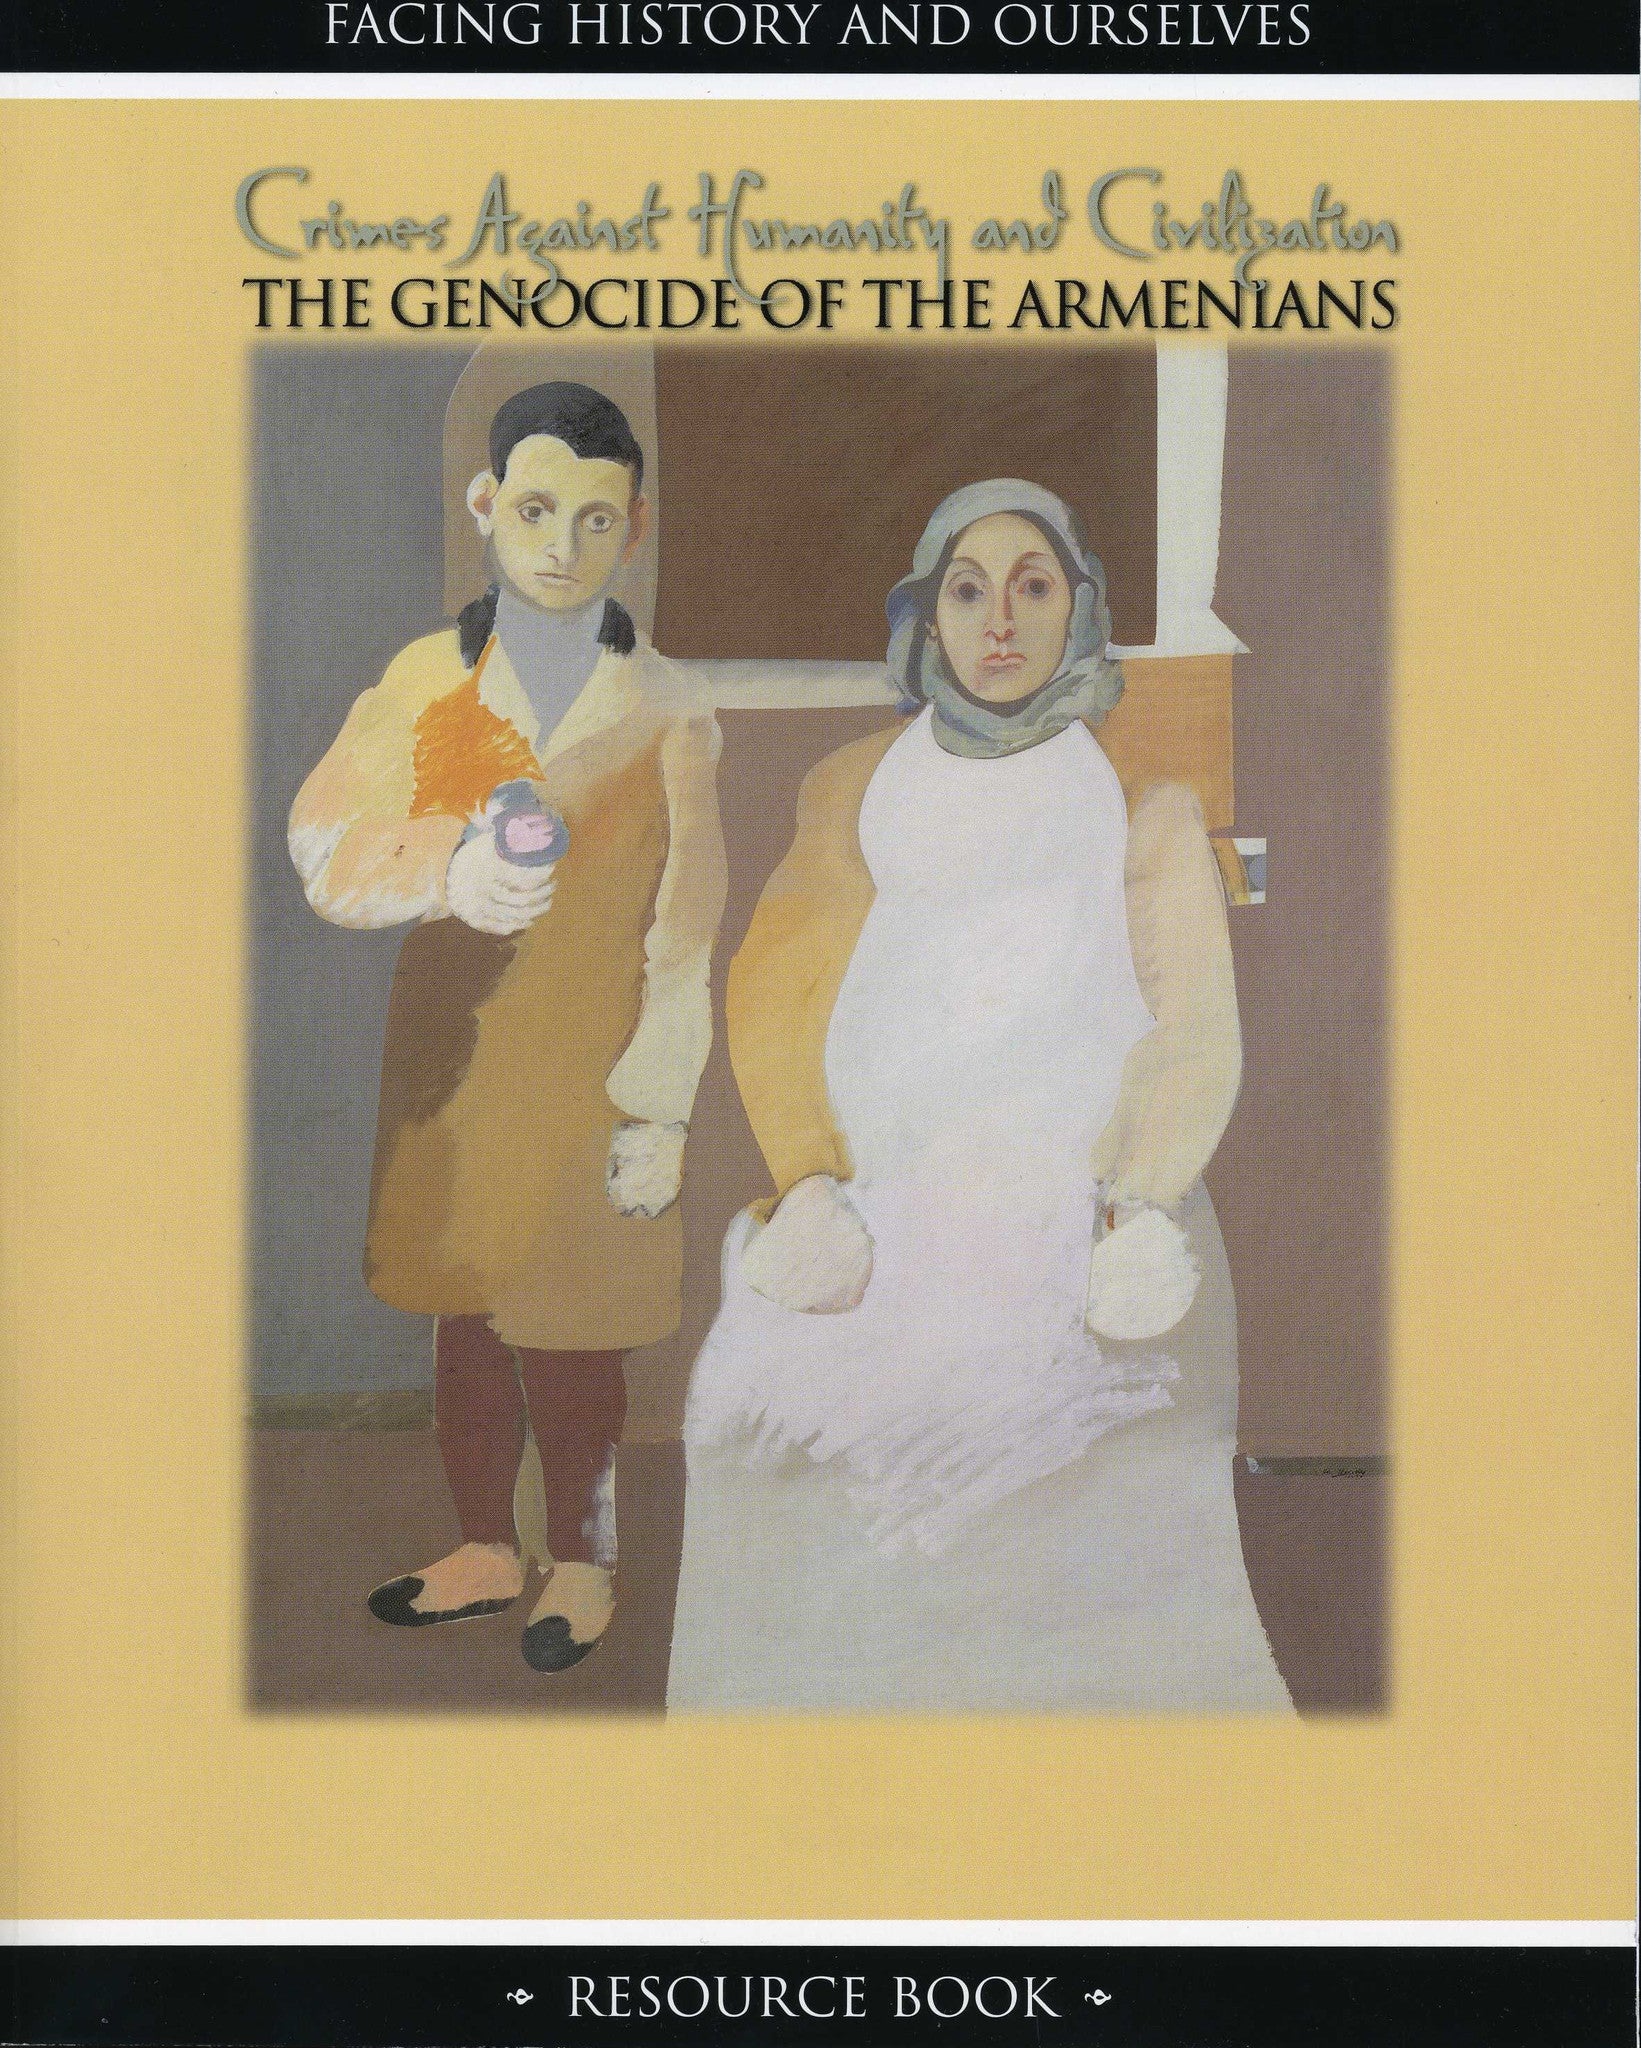 CRIMES AGAINST HUMANITY AND CIVILIZATION - The Genocide of the Armenians